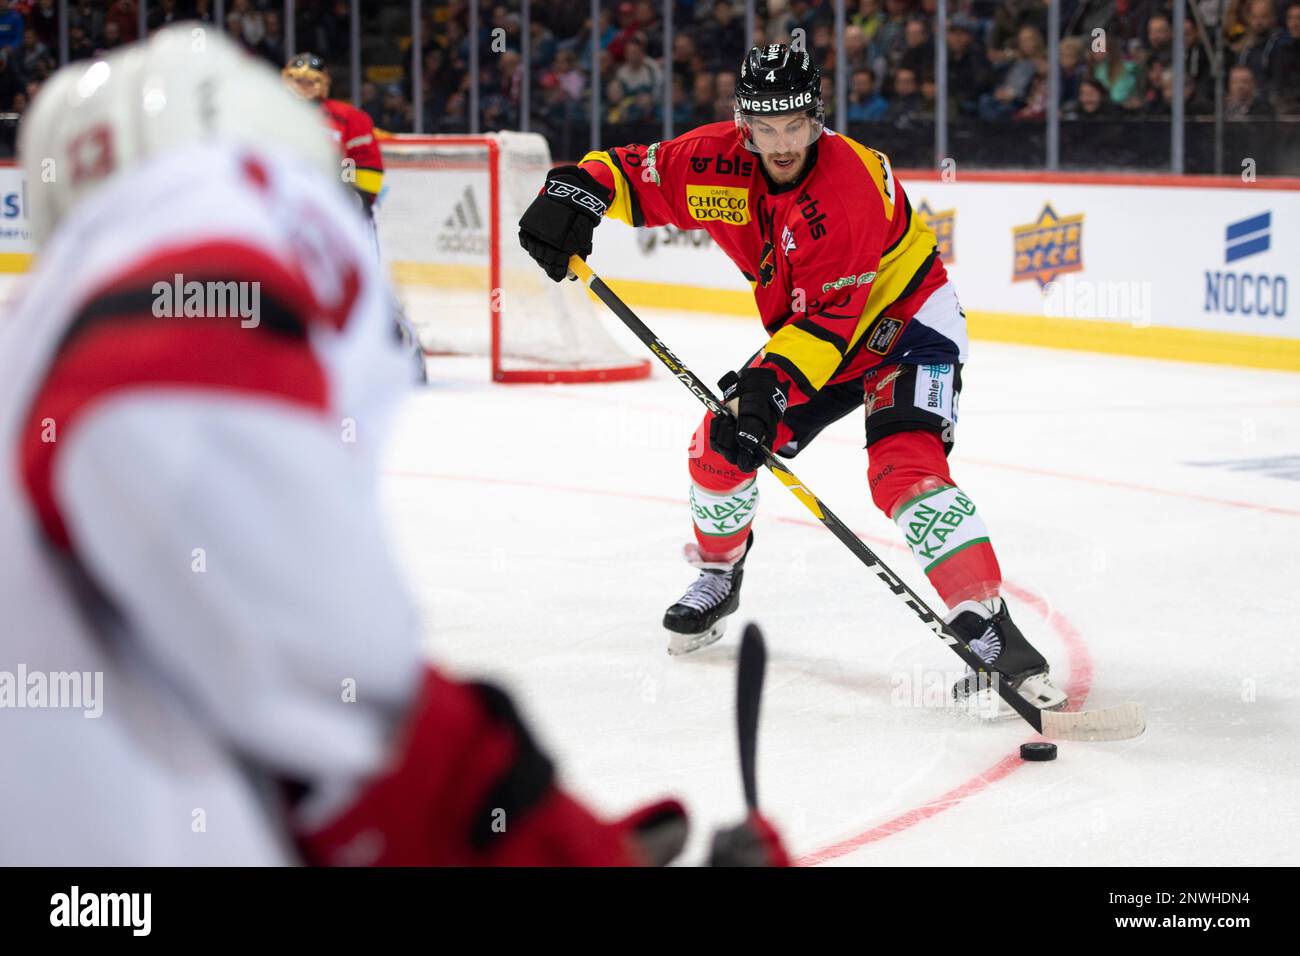 New Jersey Devils Nico Hischier goes for the puck during a NHL friendly  game between Switzerland's SC Bern and New Jersey Devils, in Bern,  Switzerland, Monday, Oct. 1, 2018. (Anthony Anex/Keystone via